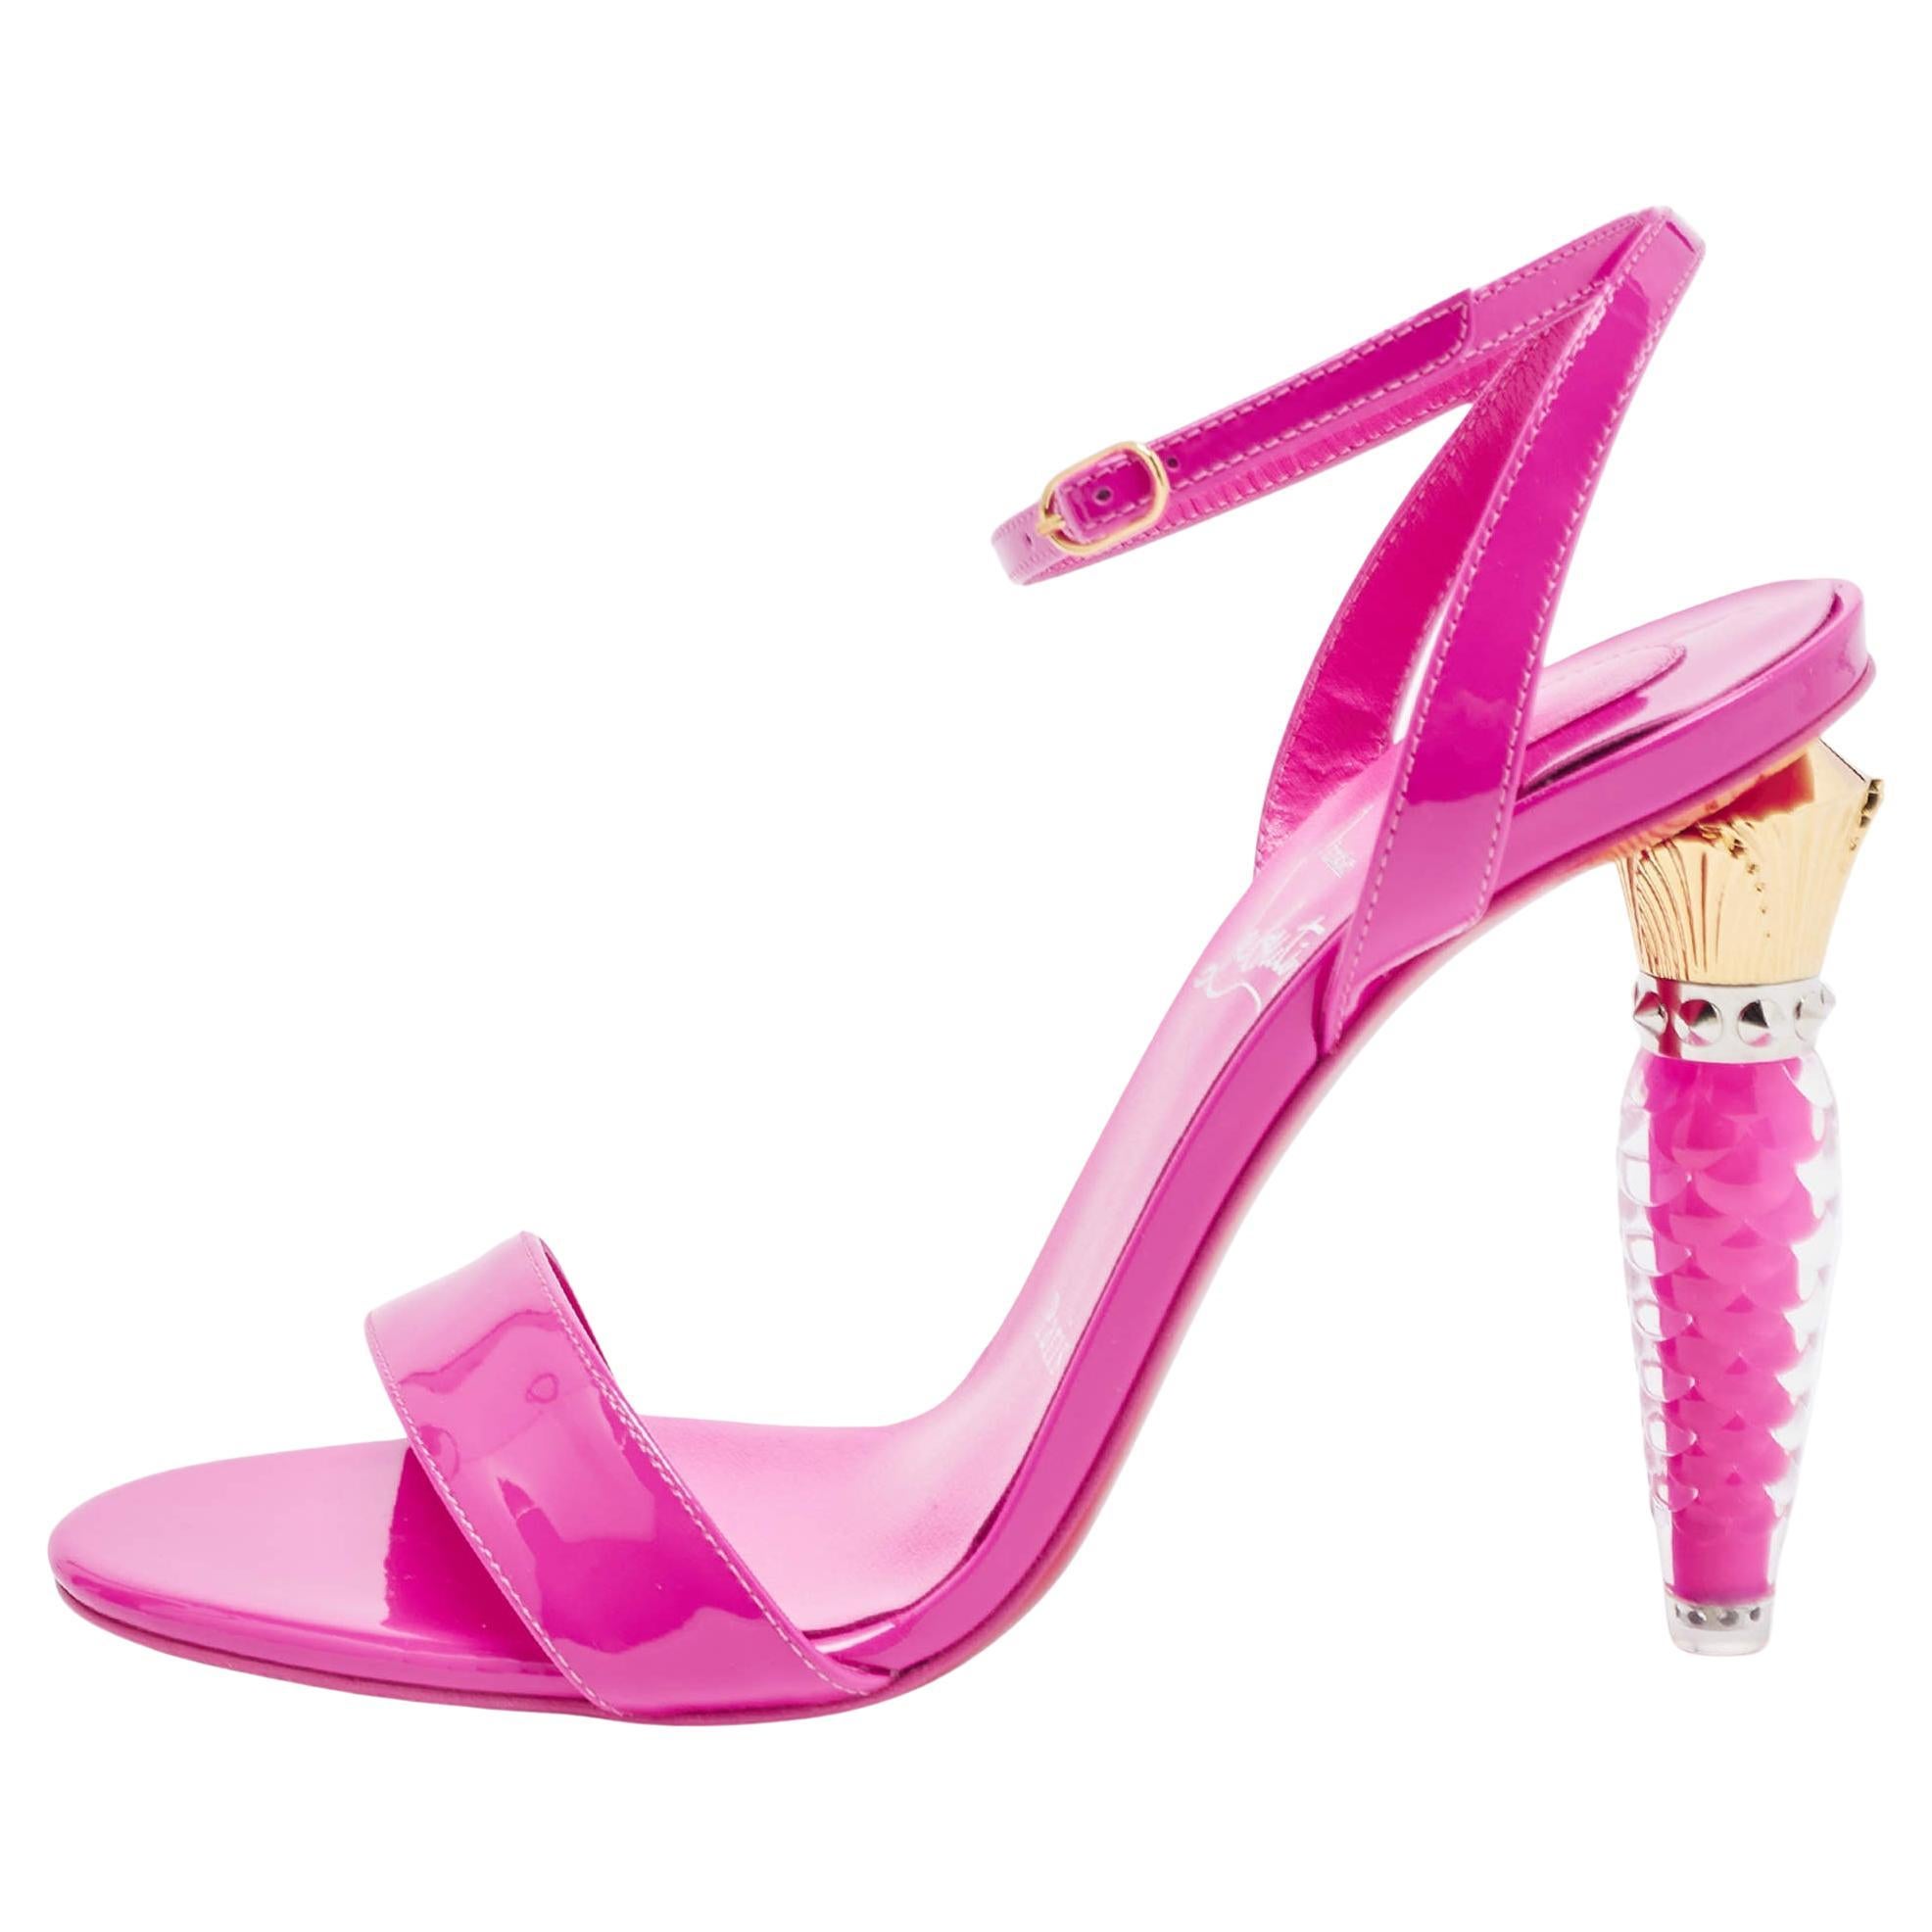 Christian Louboutin Fuchsia Lipgloss Queen Ankle Strap Sandals Size 36